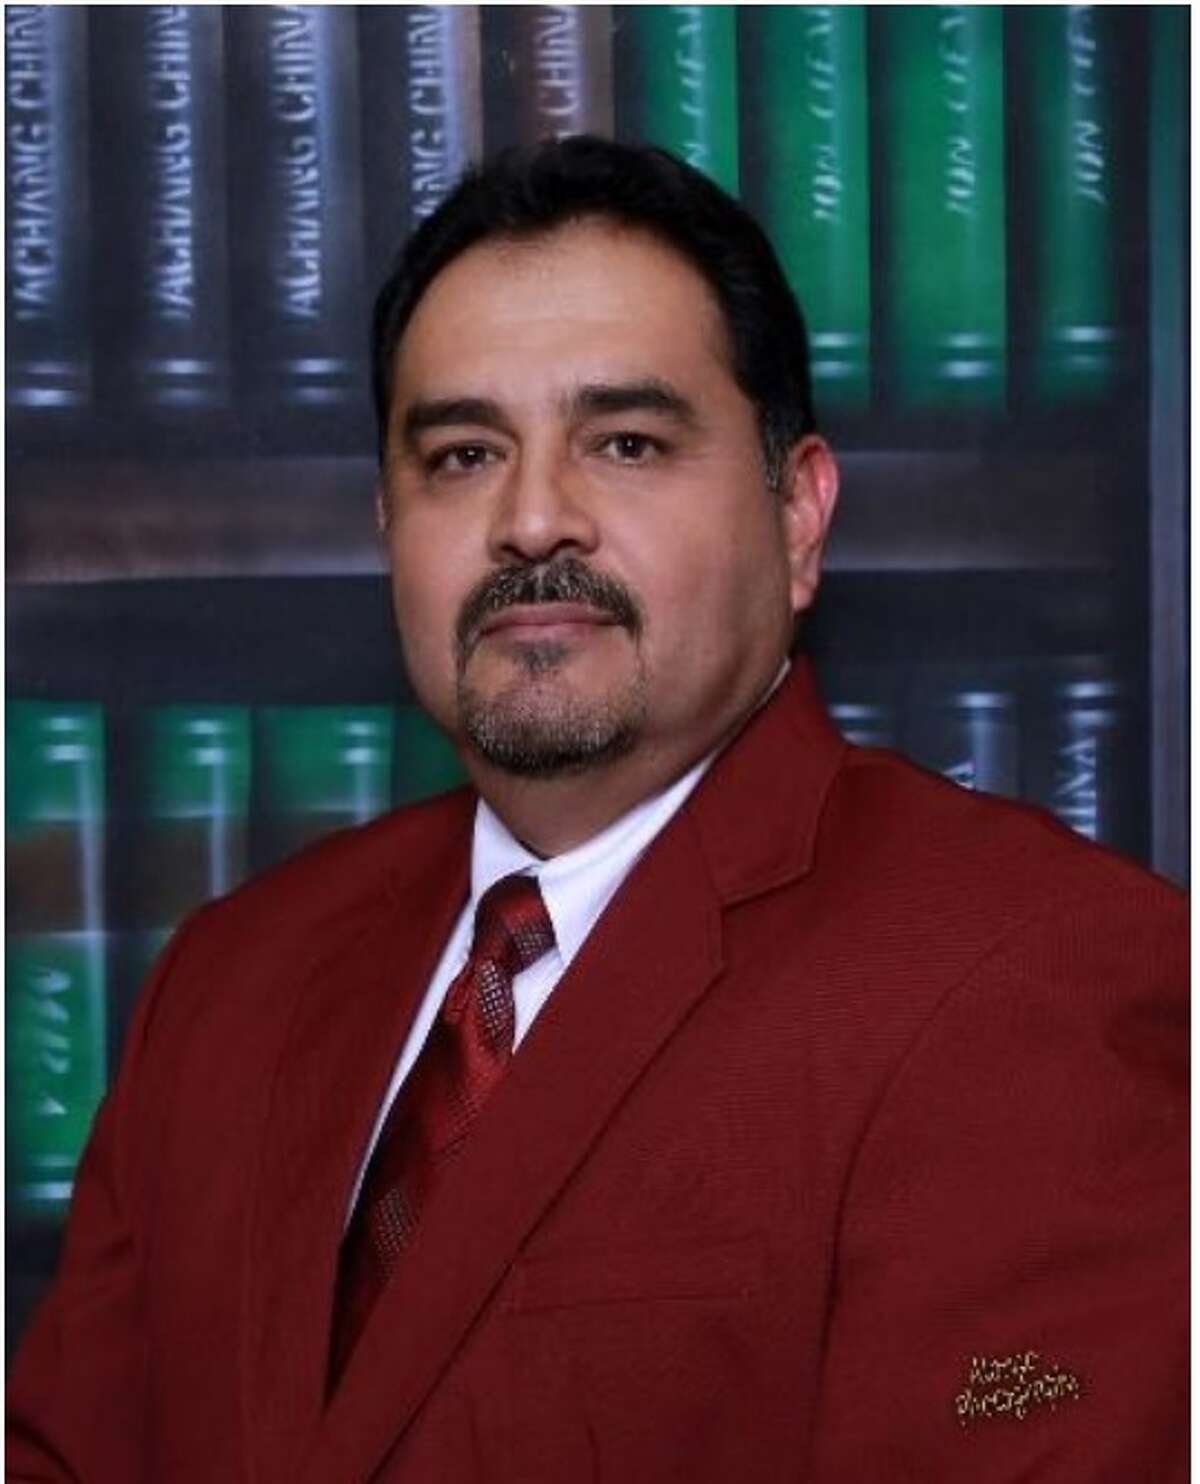 Eloy Infante, a board member at Donna ISD, was charged with federal bribery charges in November 2015.